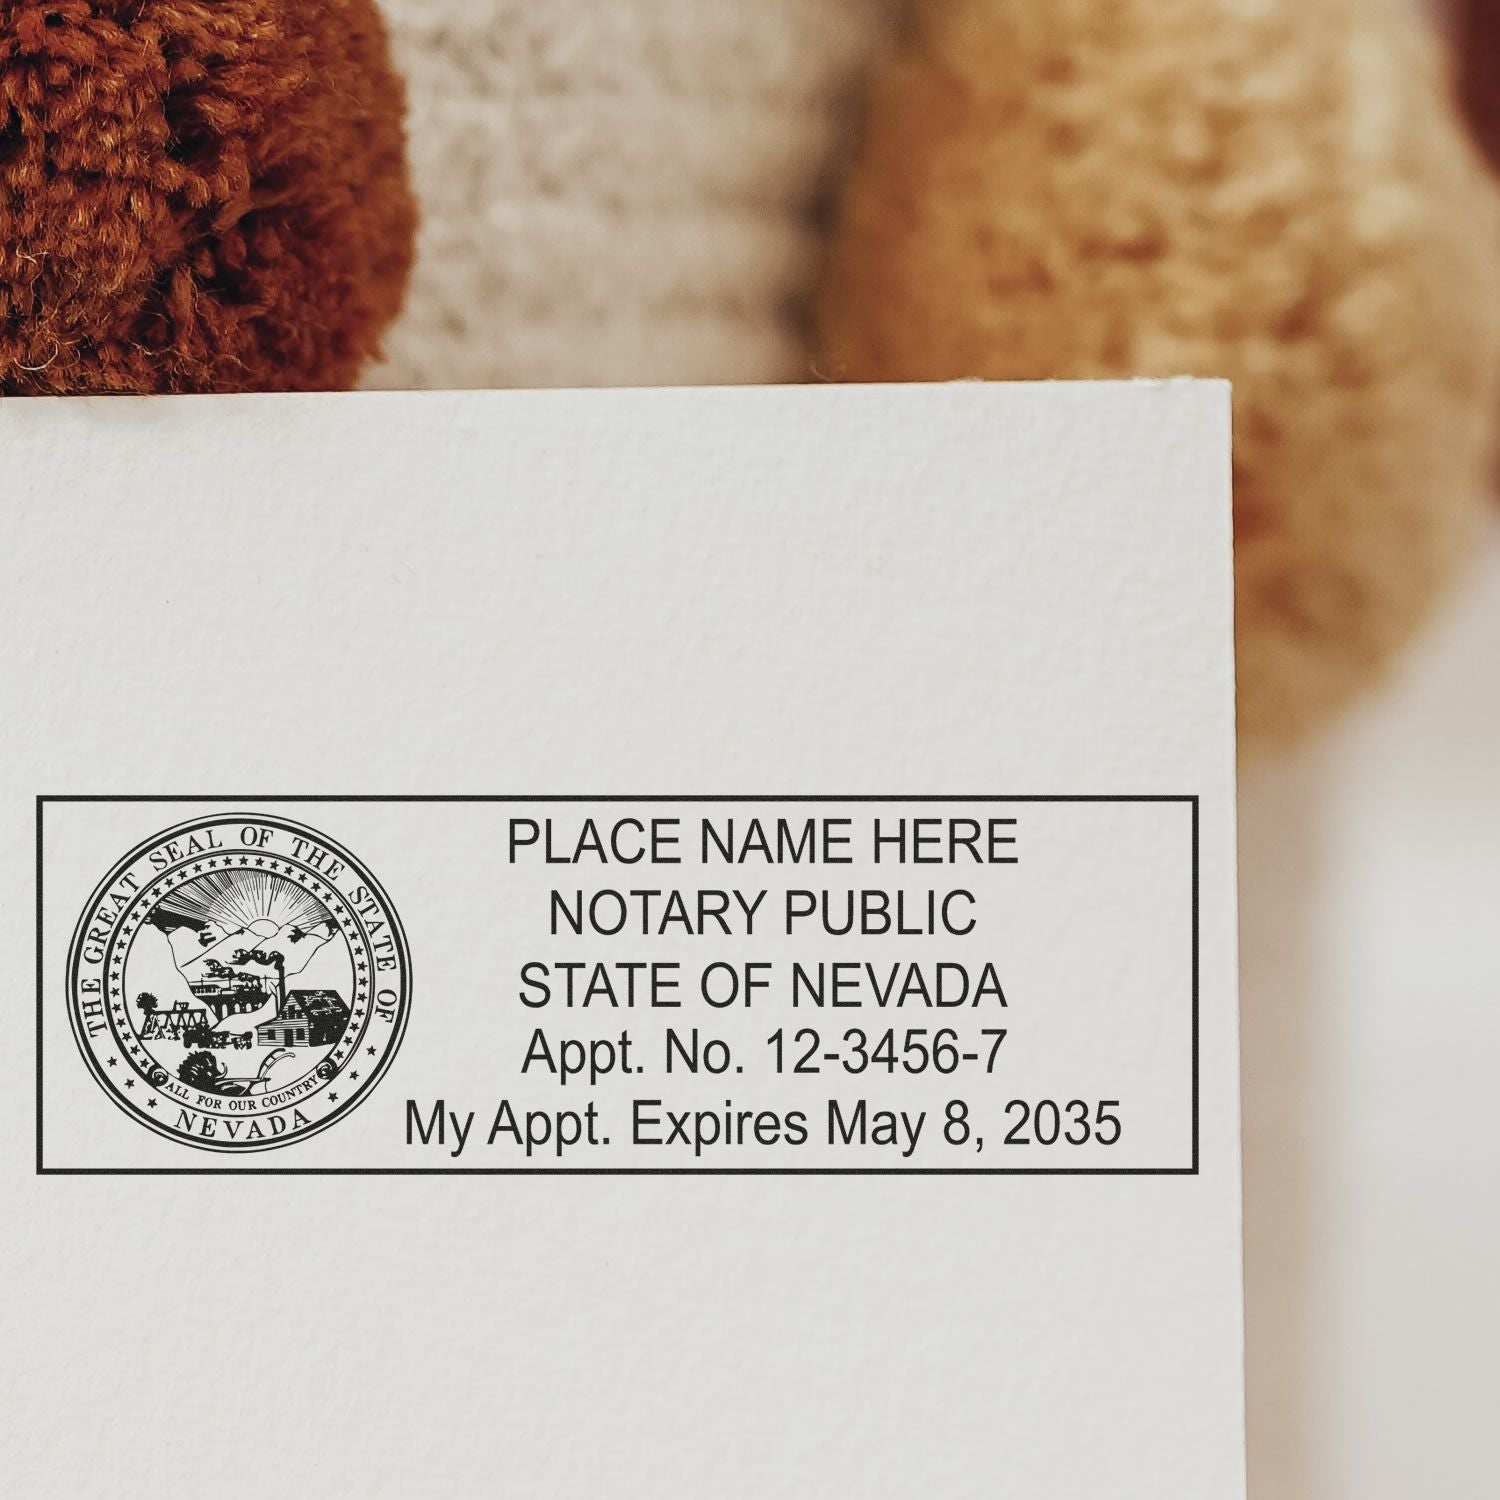 Another Example of a stamped impression of the Heavy-Duty Nevada Rectangular Notary Stamp on a piece of office paper.